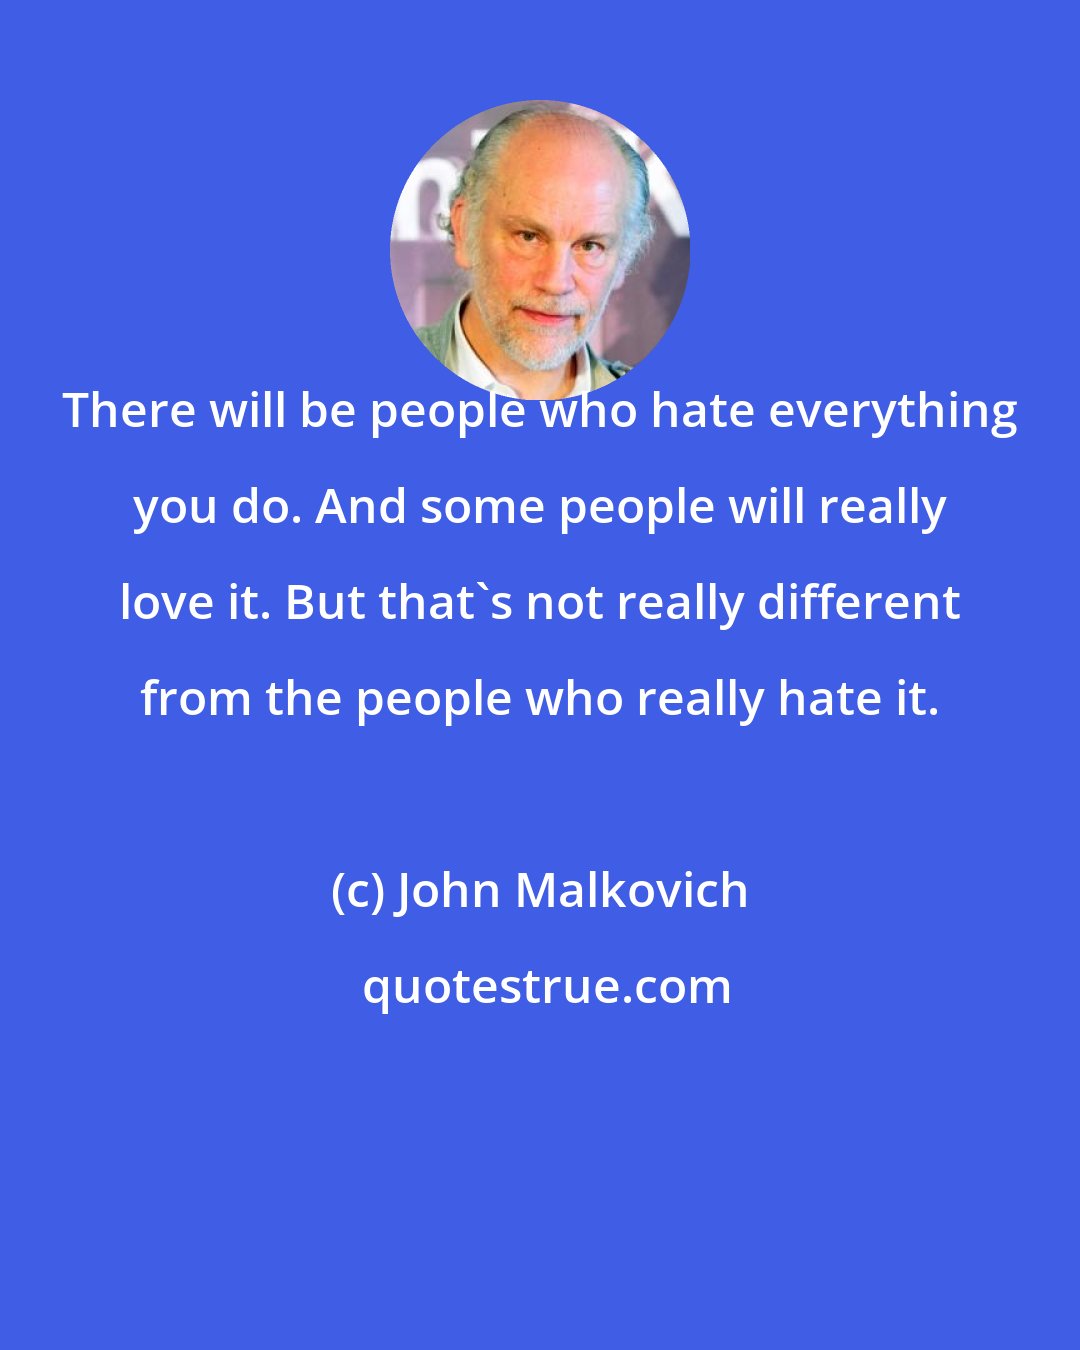 John Malkovich: There will be people who hate everything you do. And some people will really love it. But that's not really different from the people who really hate it.